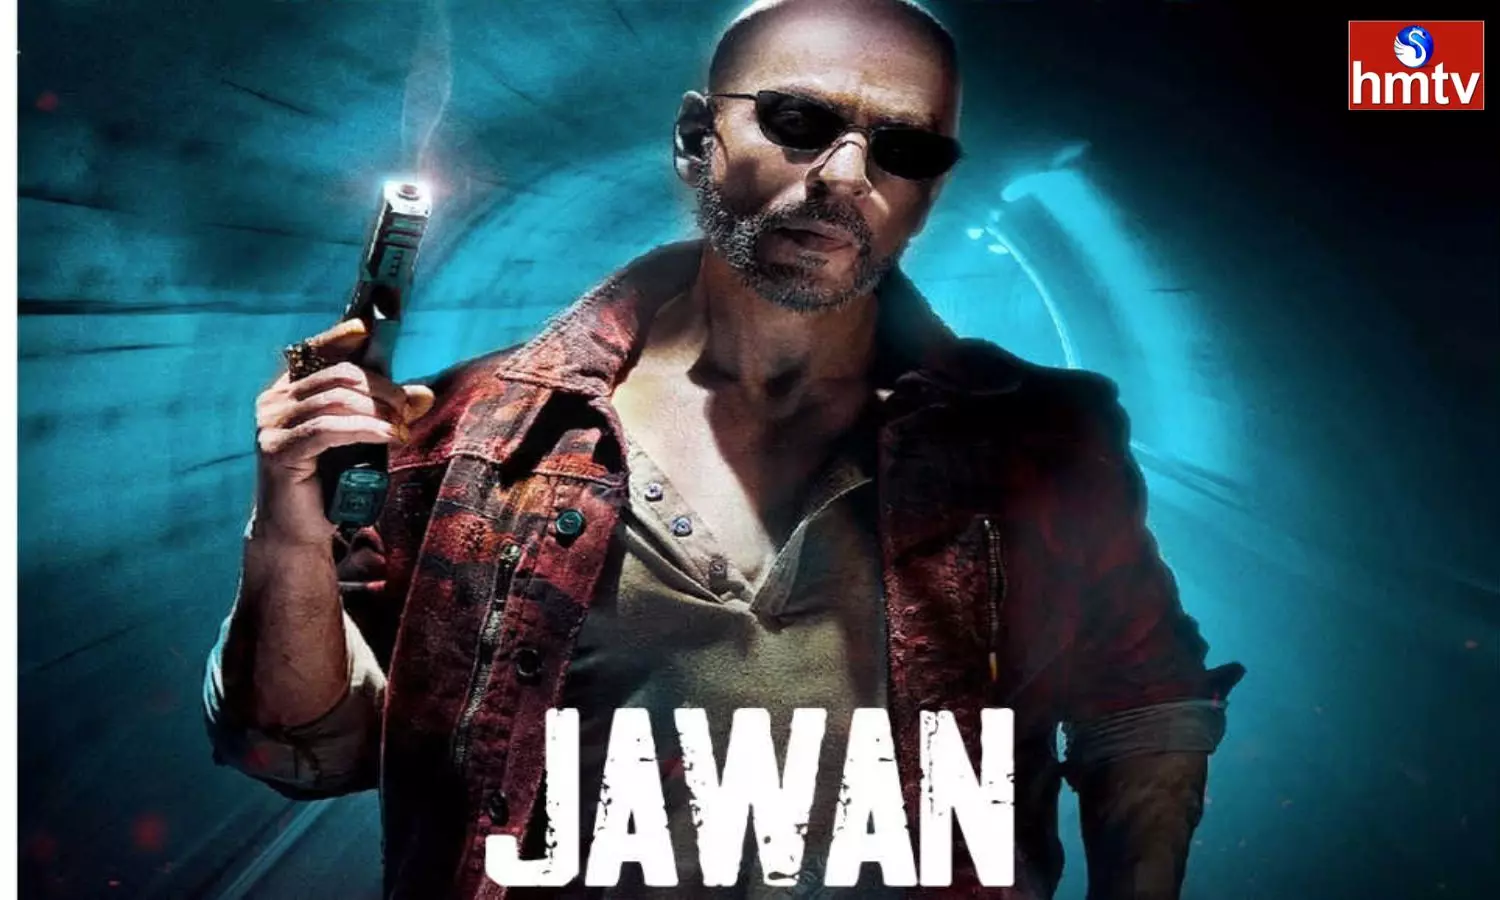 Shah Rukh Khan Jawan Movie 1st Day Collections Check Here Full Details